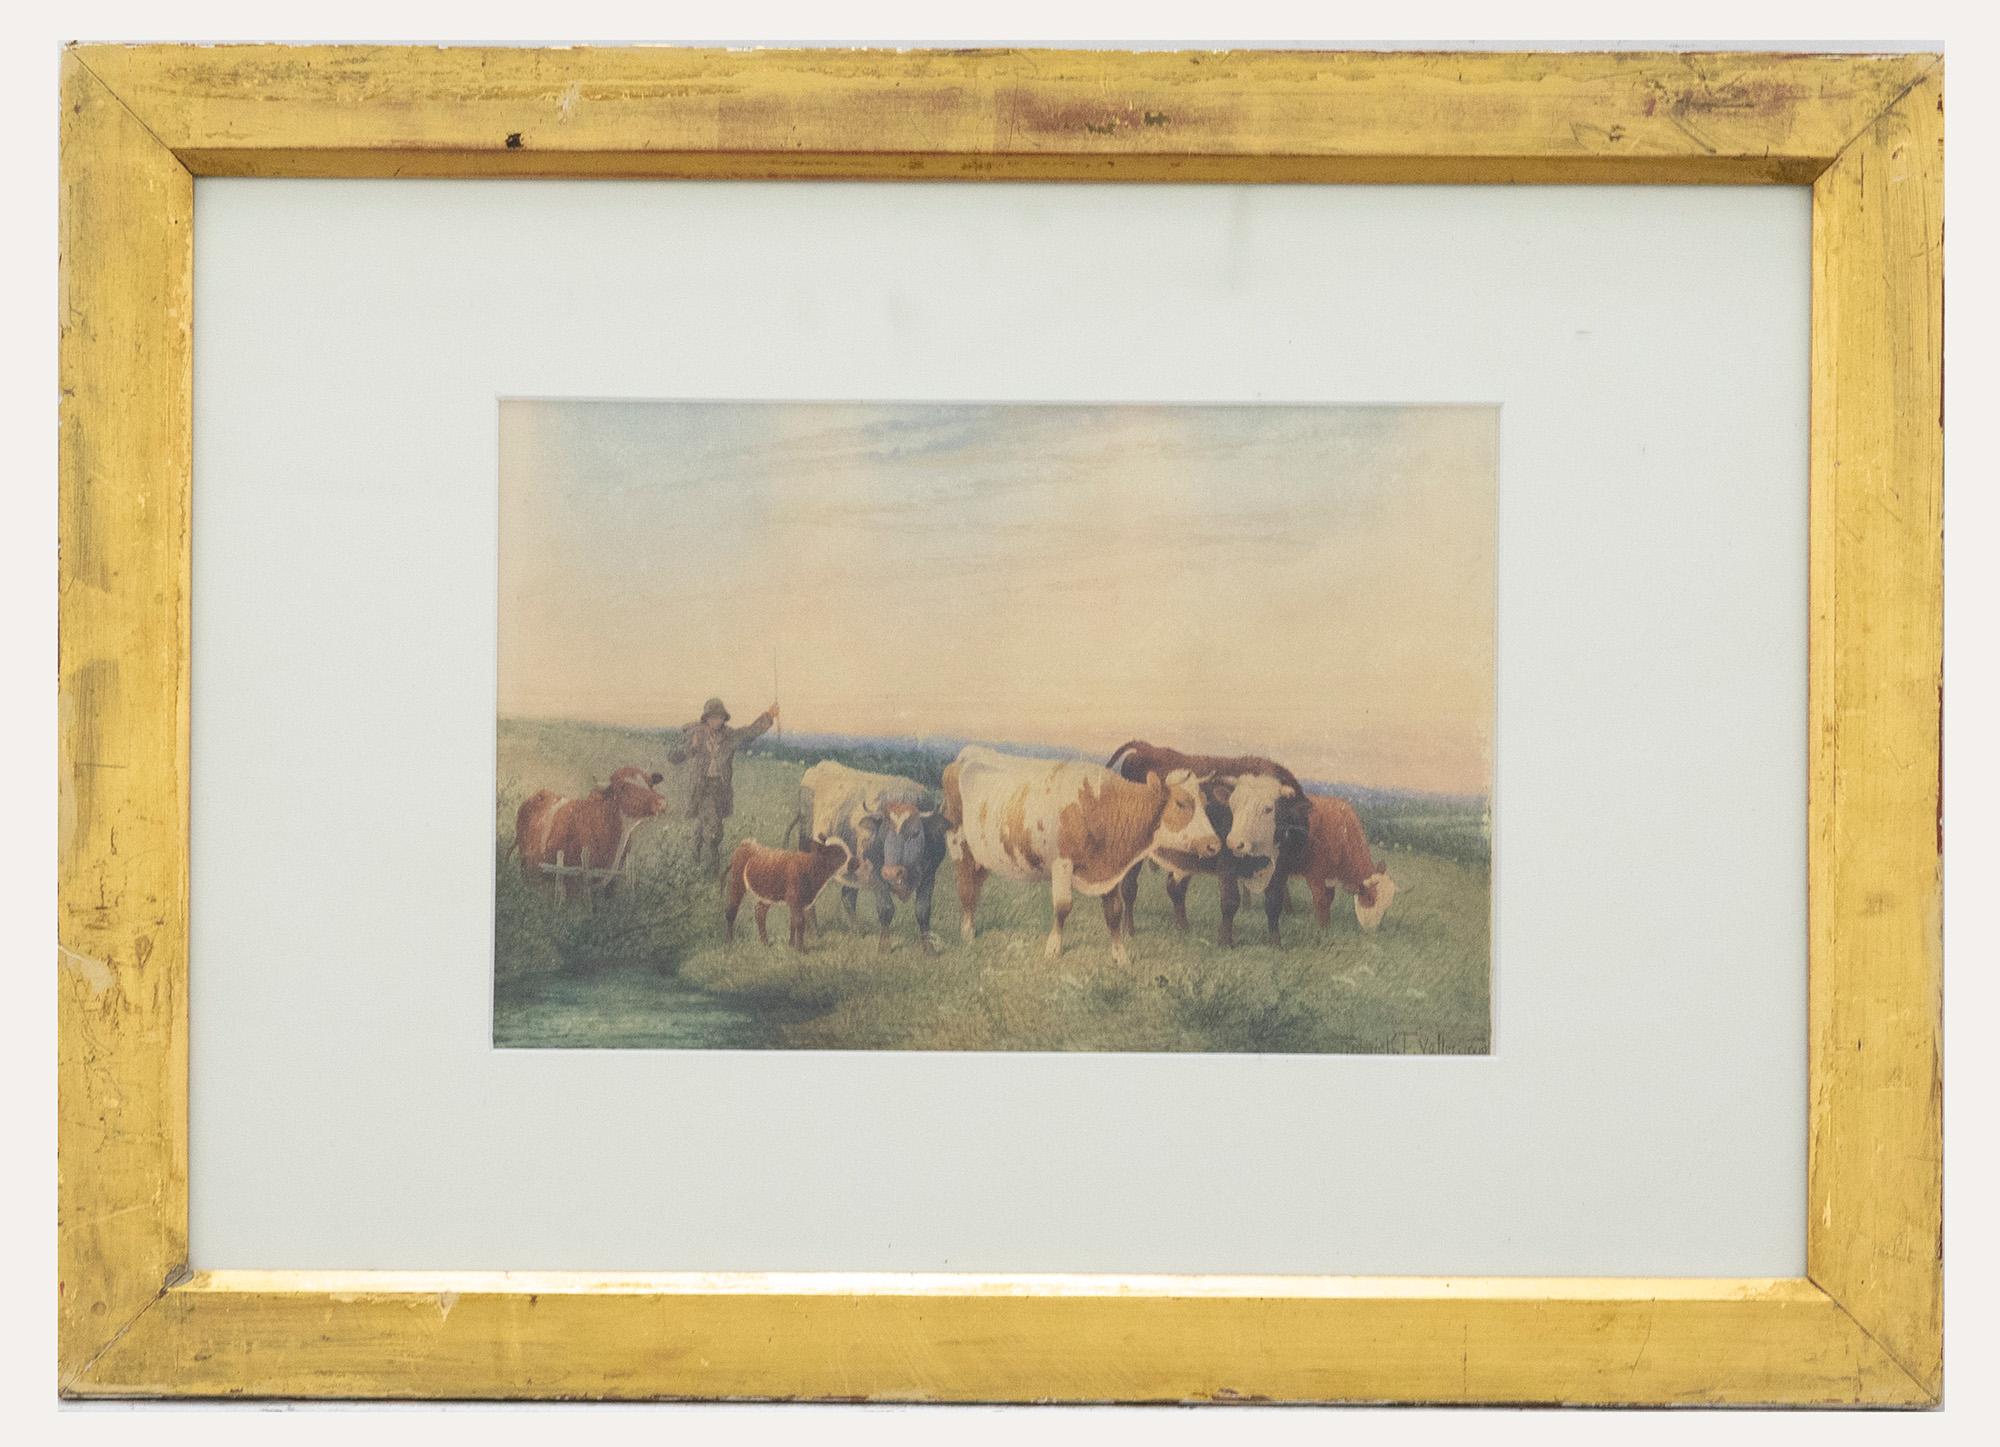 Unknown Landscape Art - Frederick E Valter (1860-1930) - Framed Watercolour, Driving Cattle